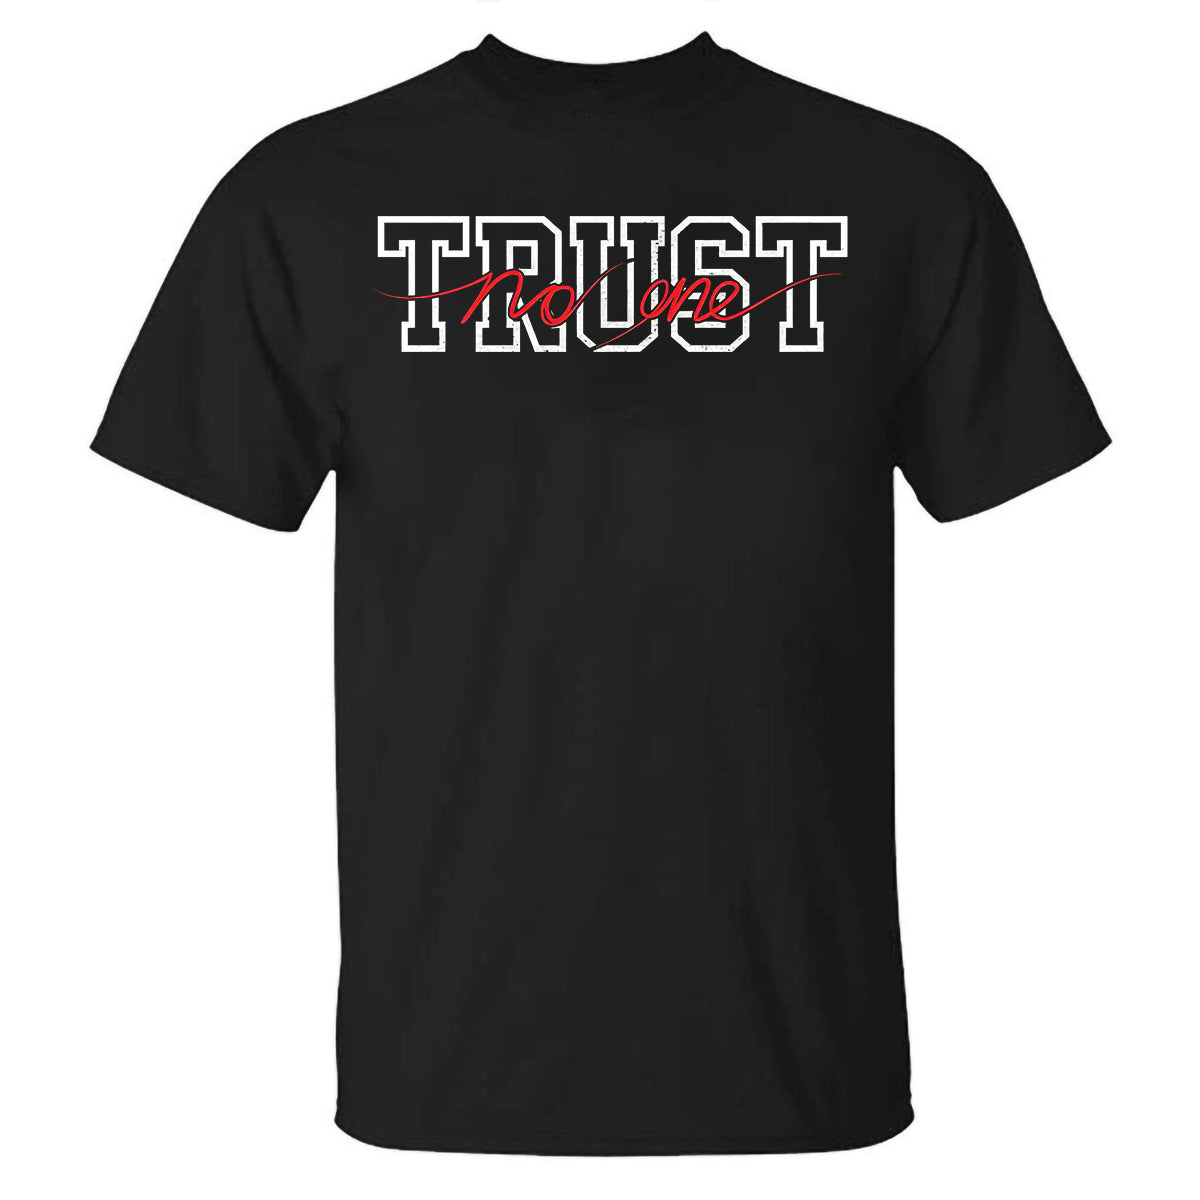 Trust No One Printed T-shirt